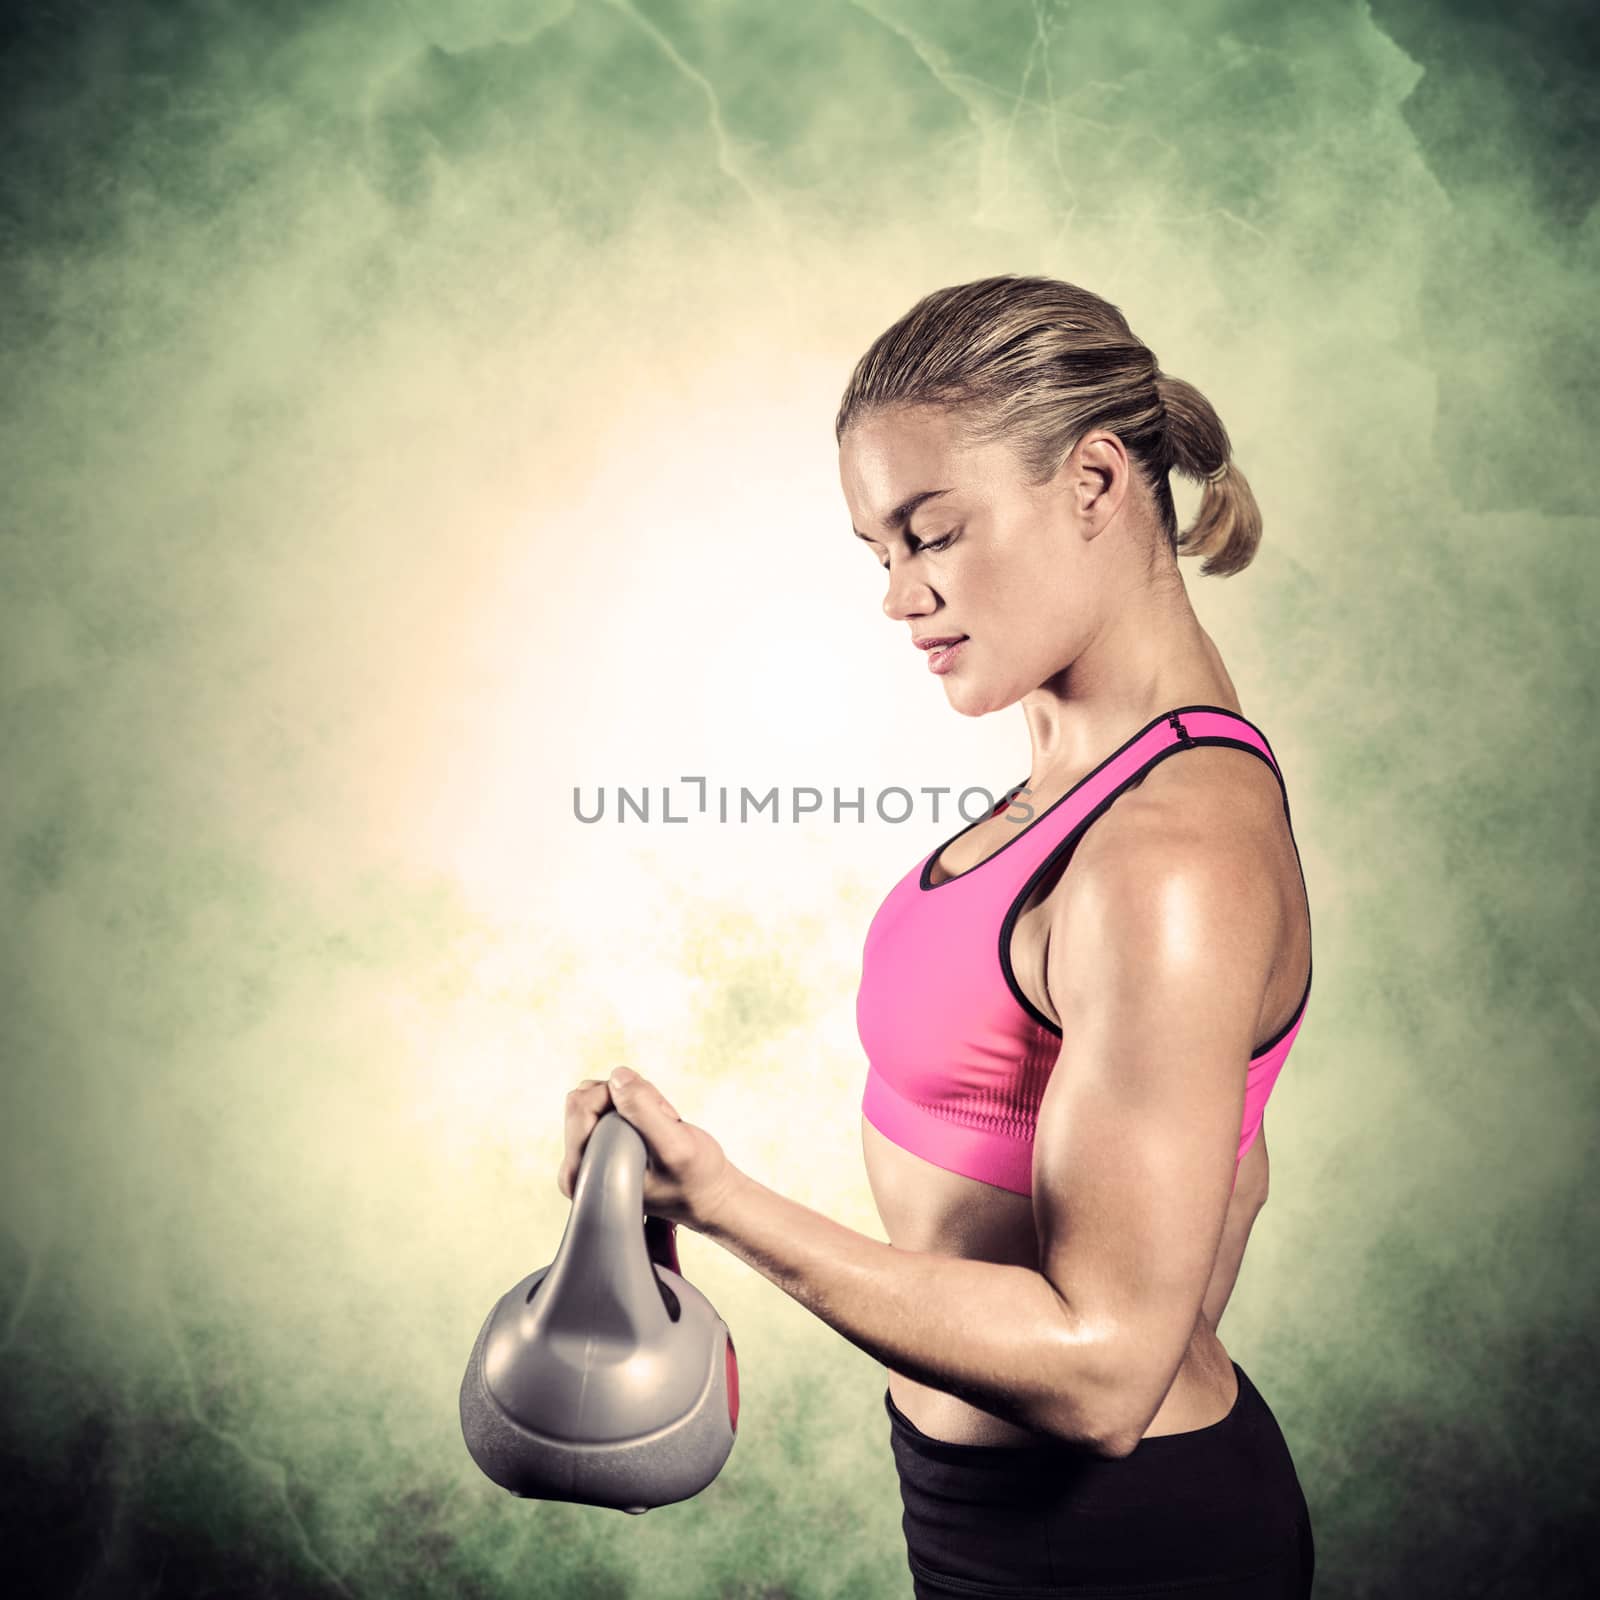 Composite image of muscular woman lifting heavy kettlebell by Wavebreakmedia